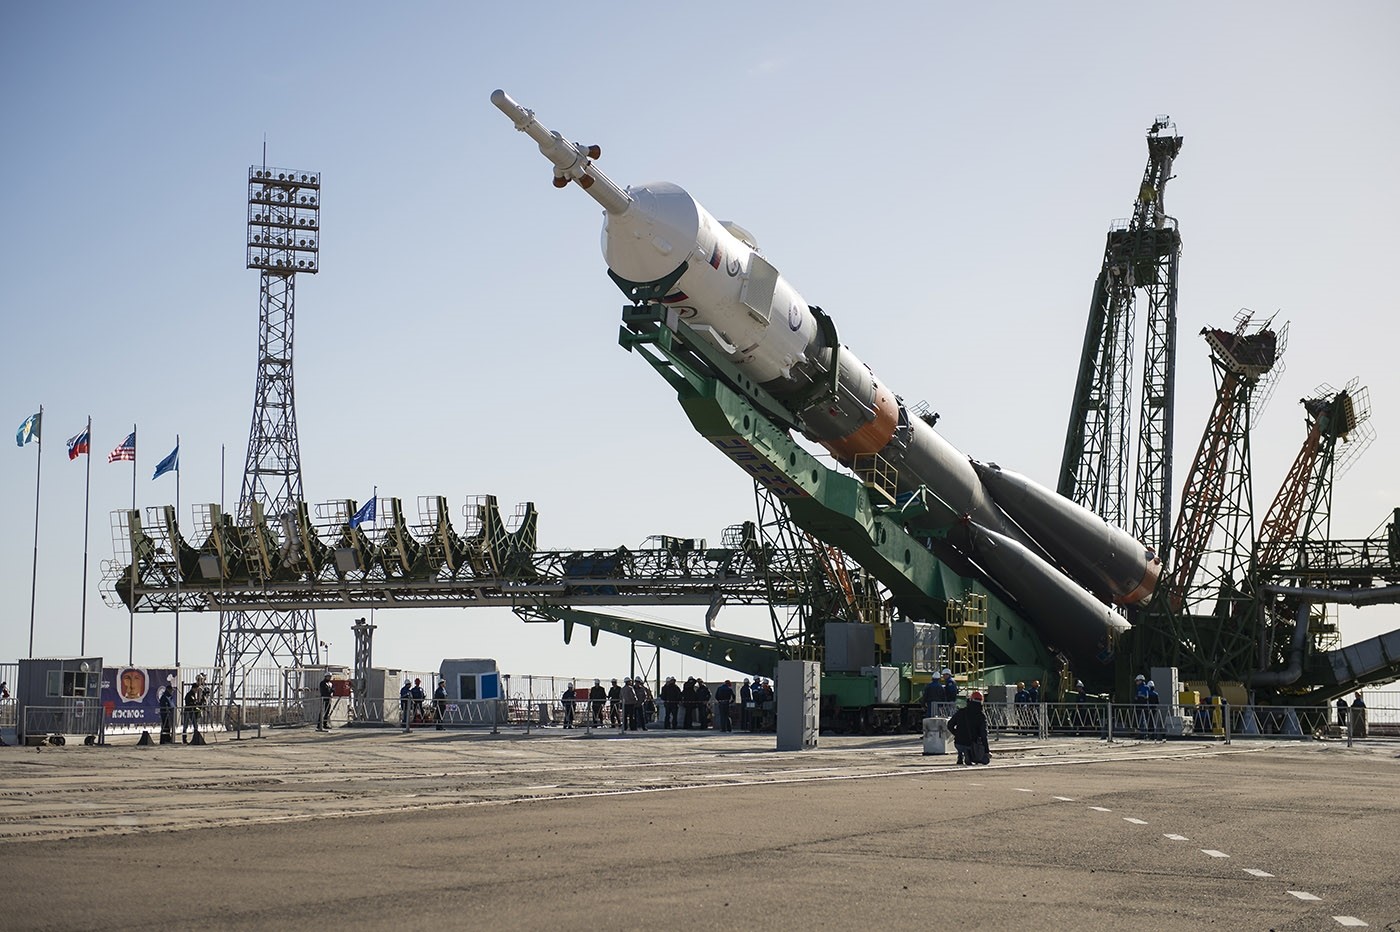 Soyuz capsule carrying American, Russian duo blasts off for space station